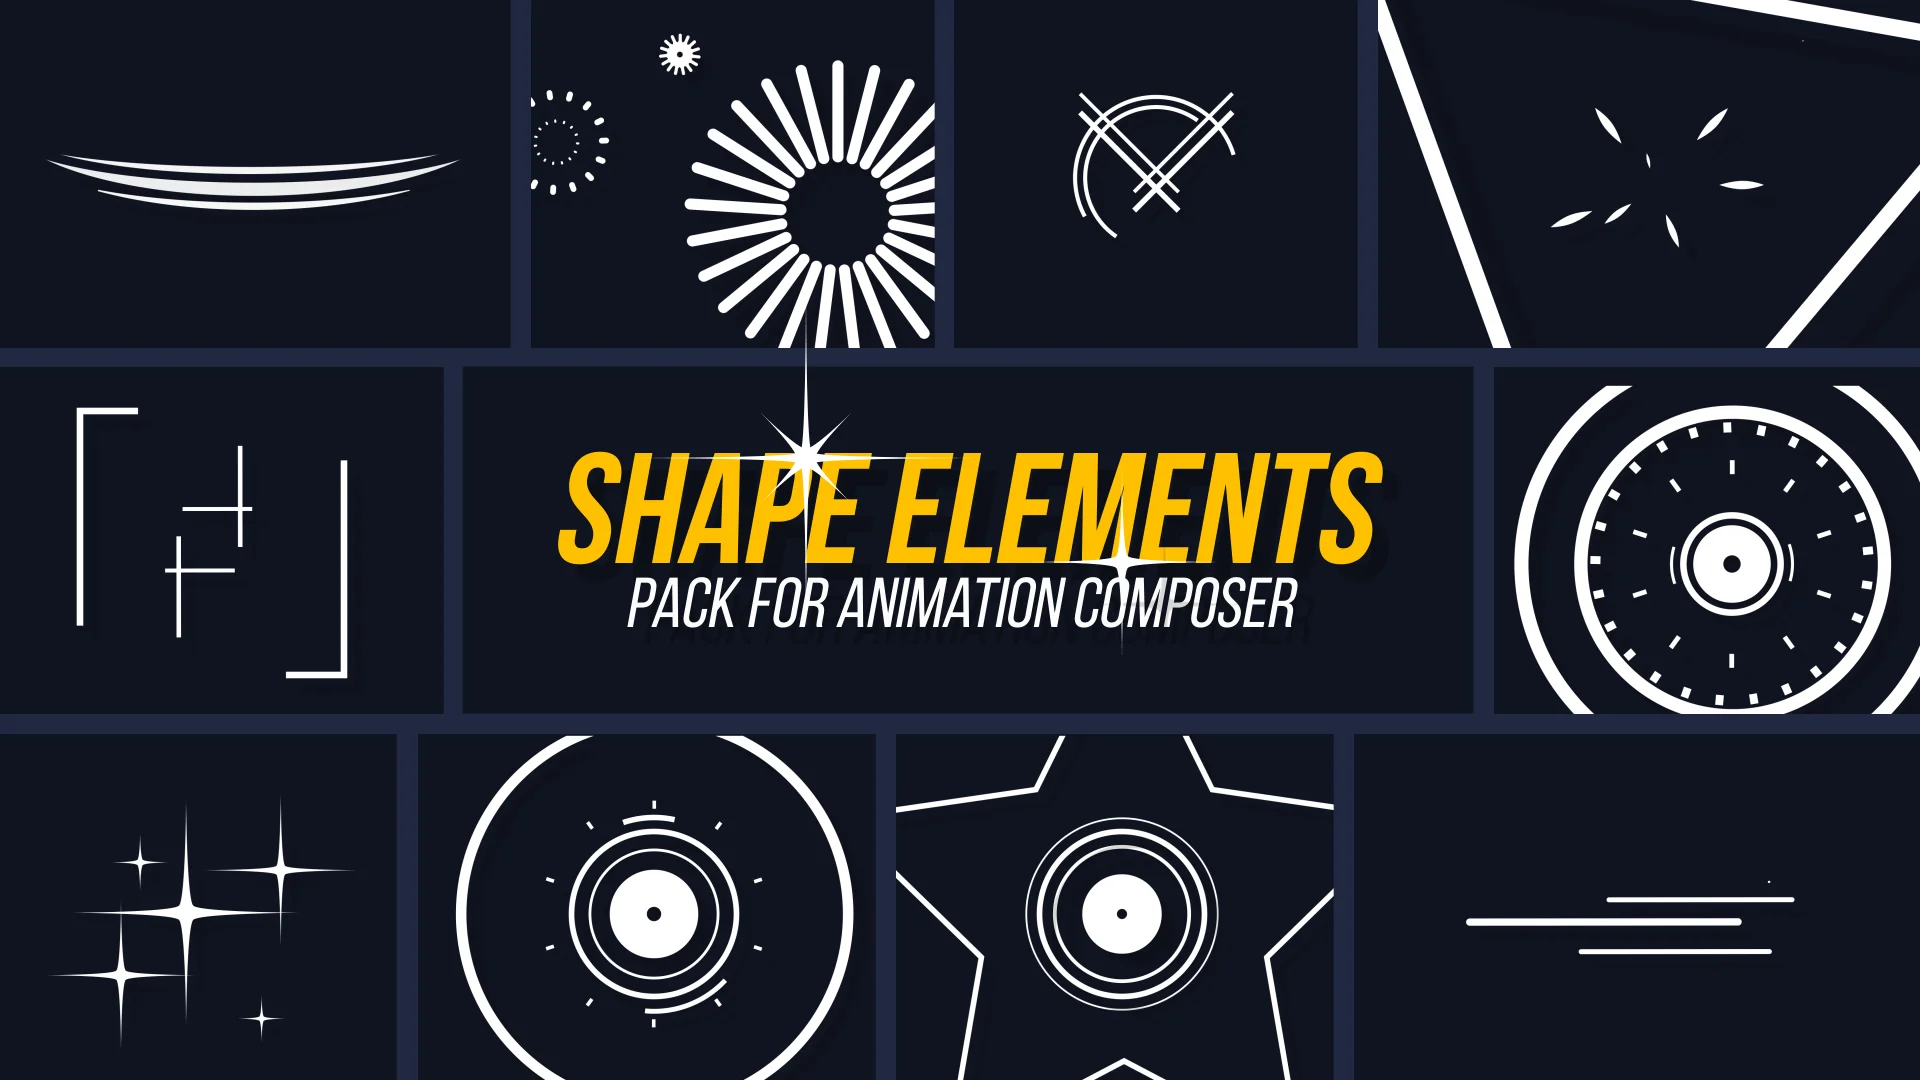 Element animation. Animation Composer. Videohive Shape and Motion animated elements Pack. Shape elements